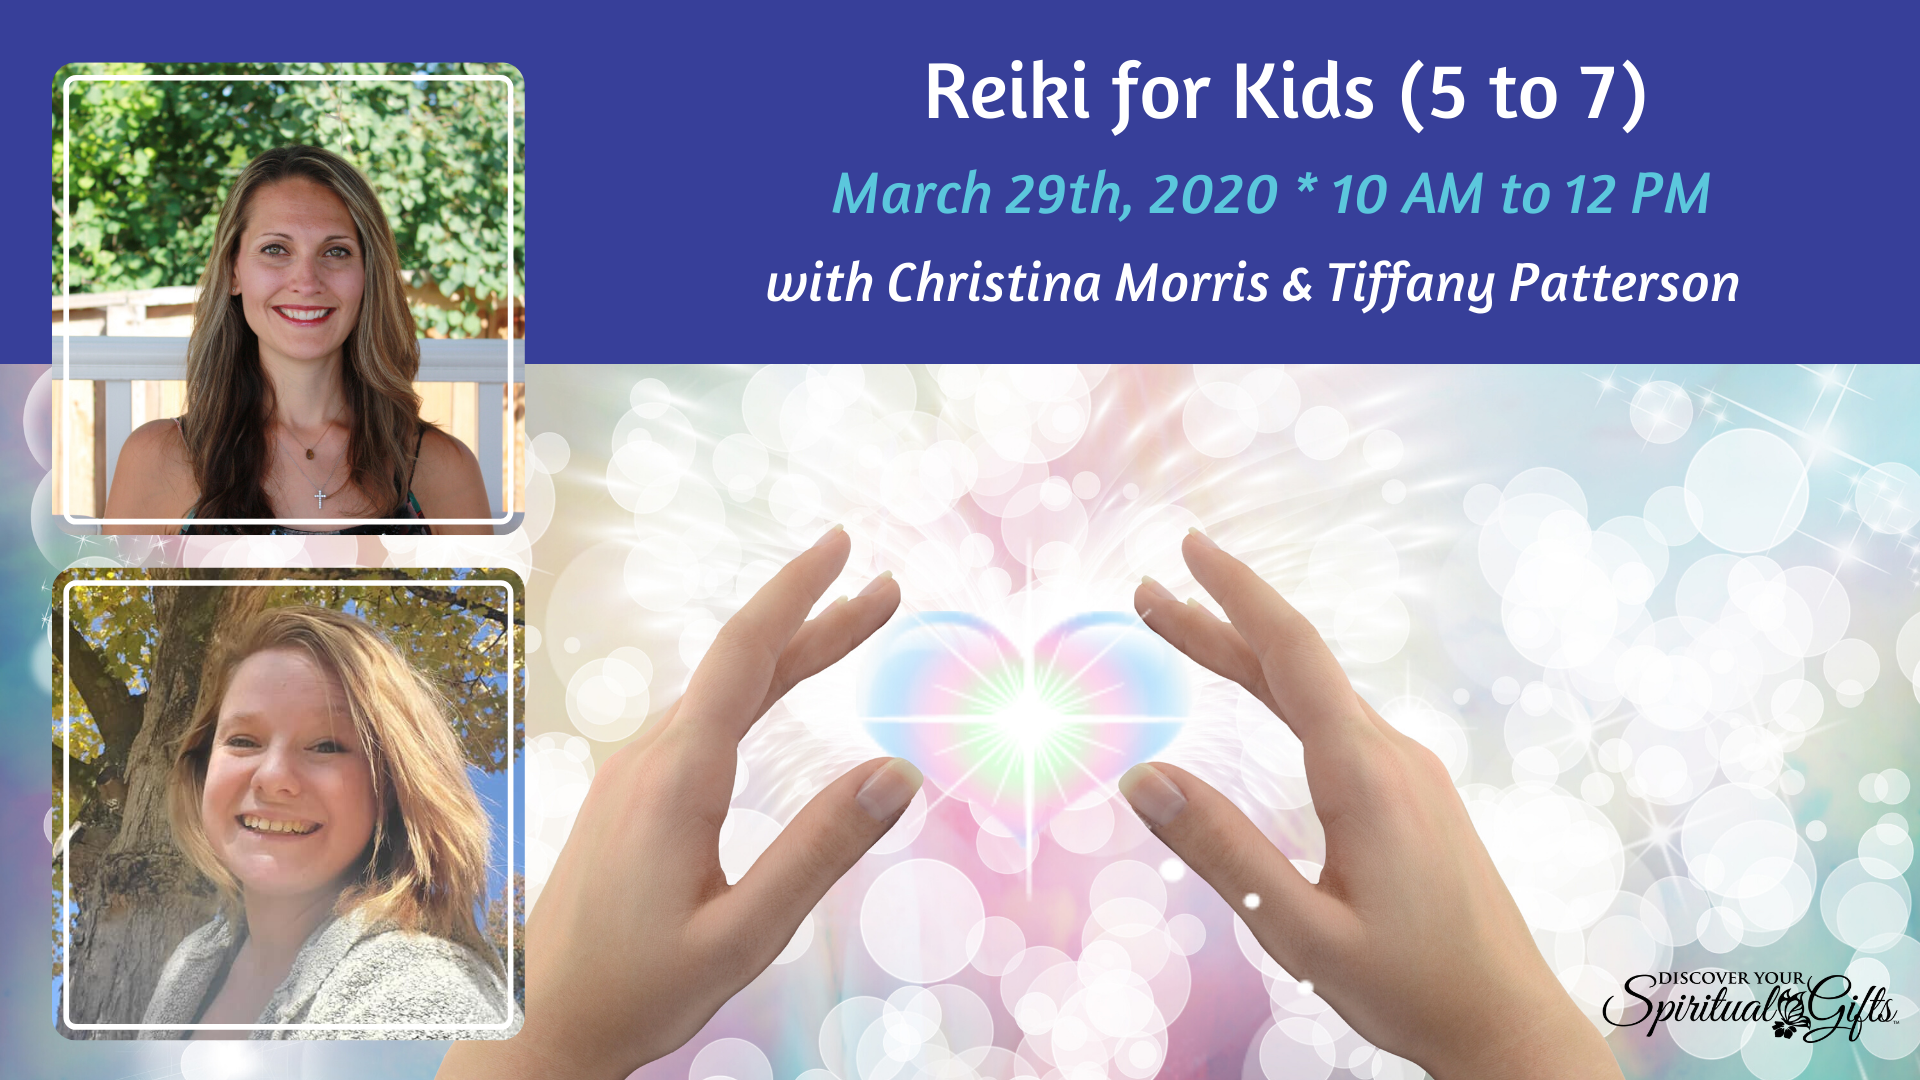 Reiki for Kids (5 to 7 Years Old)